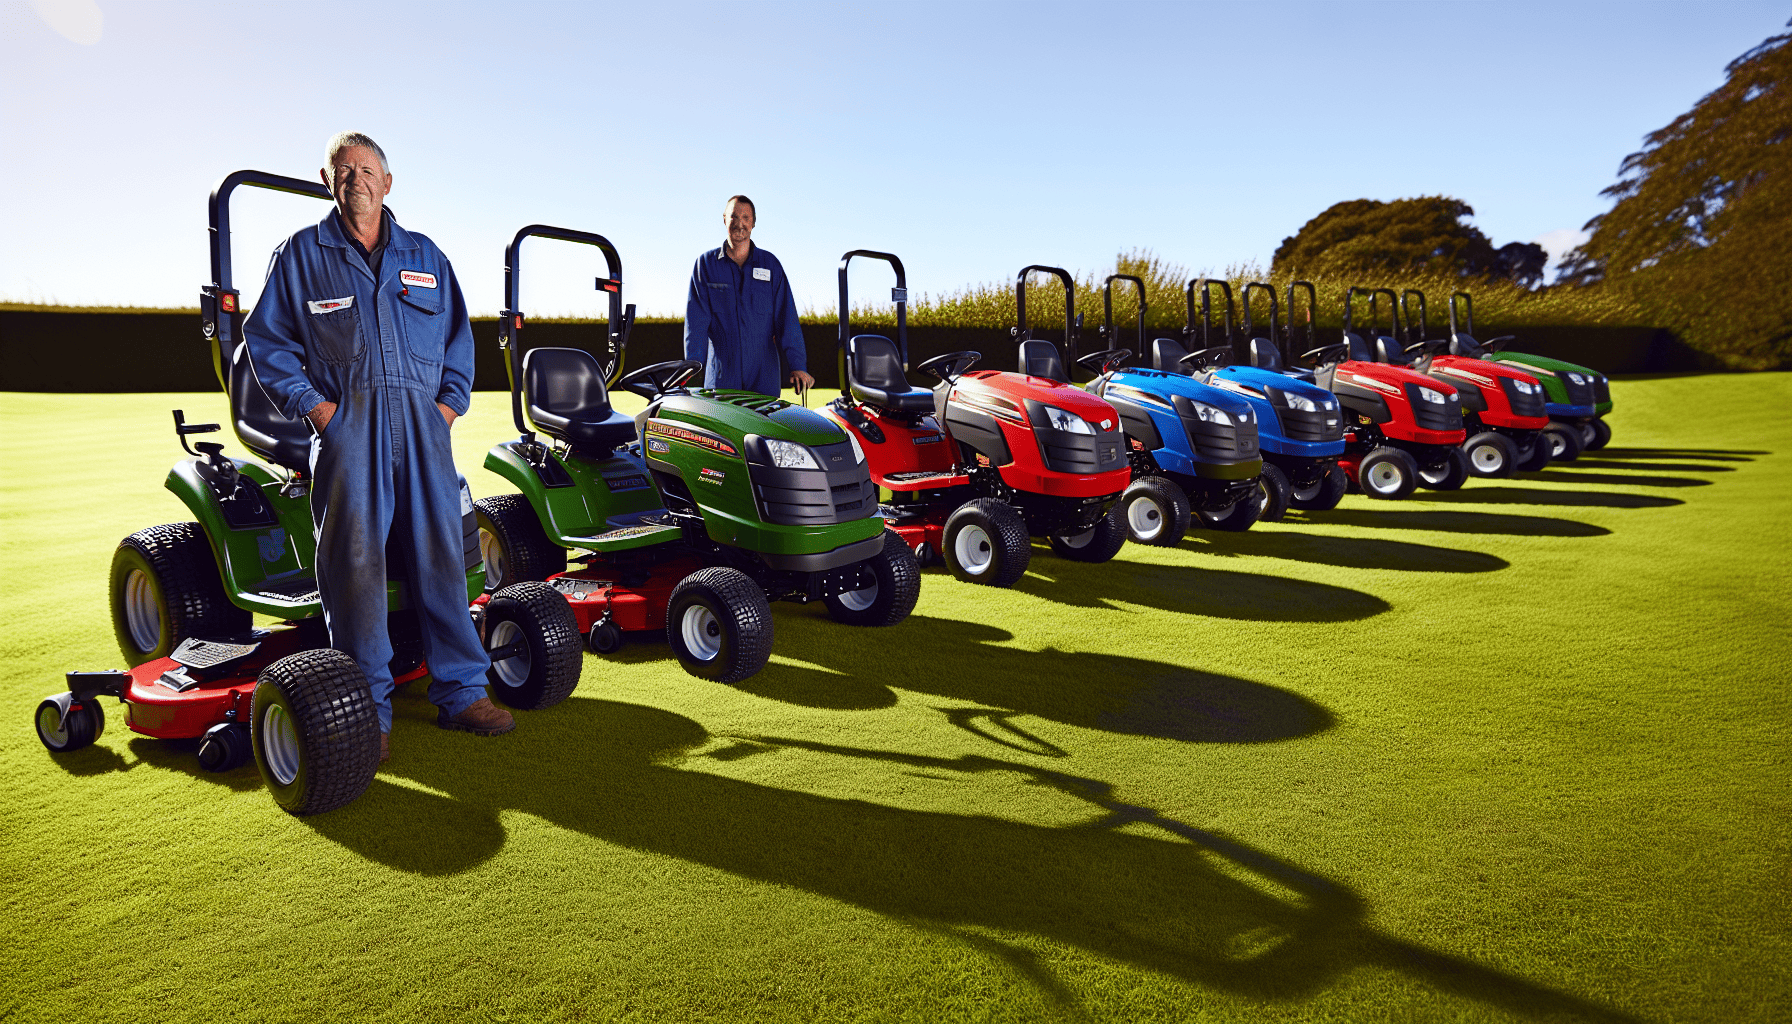 A lineup of top-performing lawn tractors